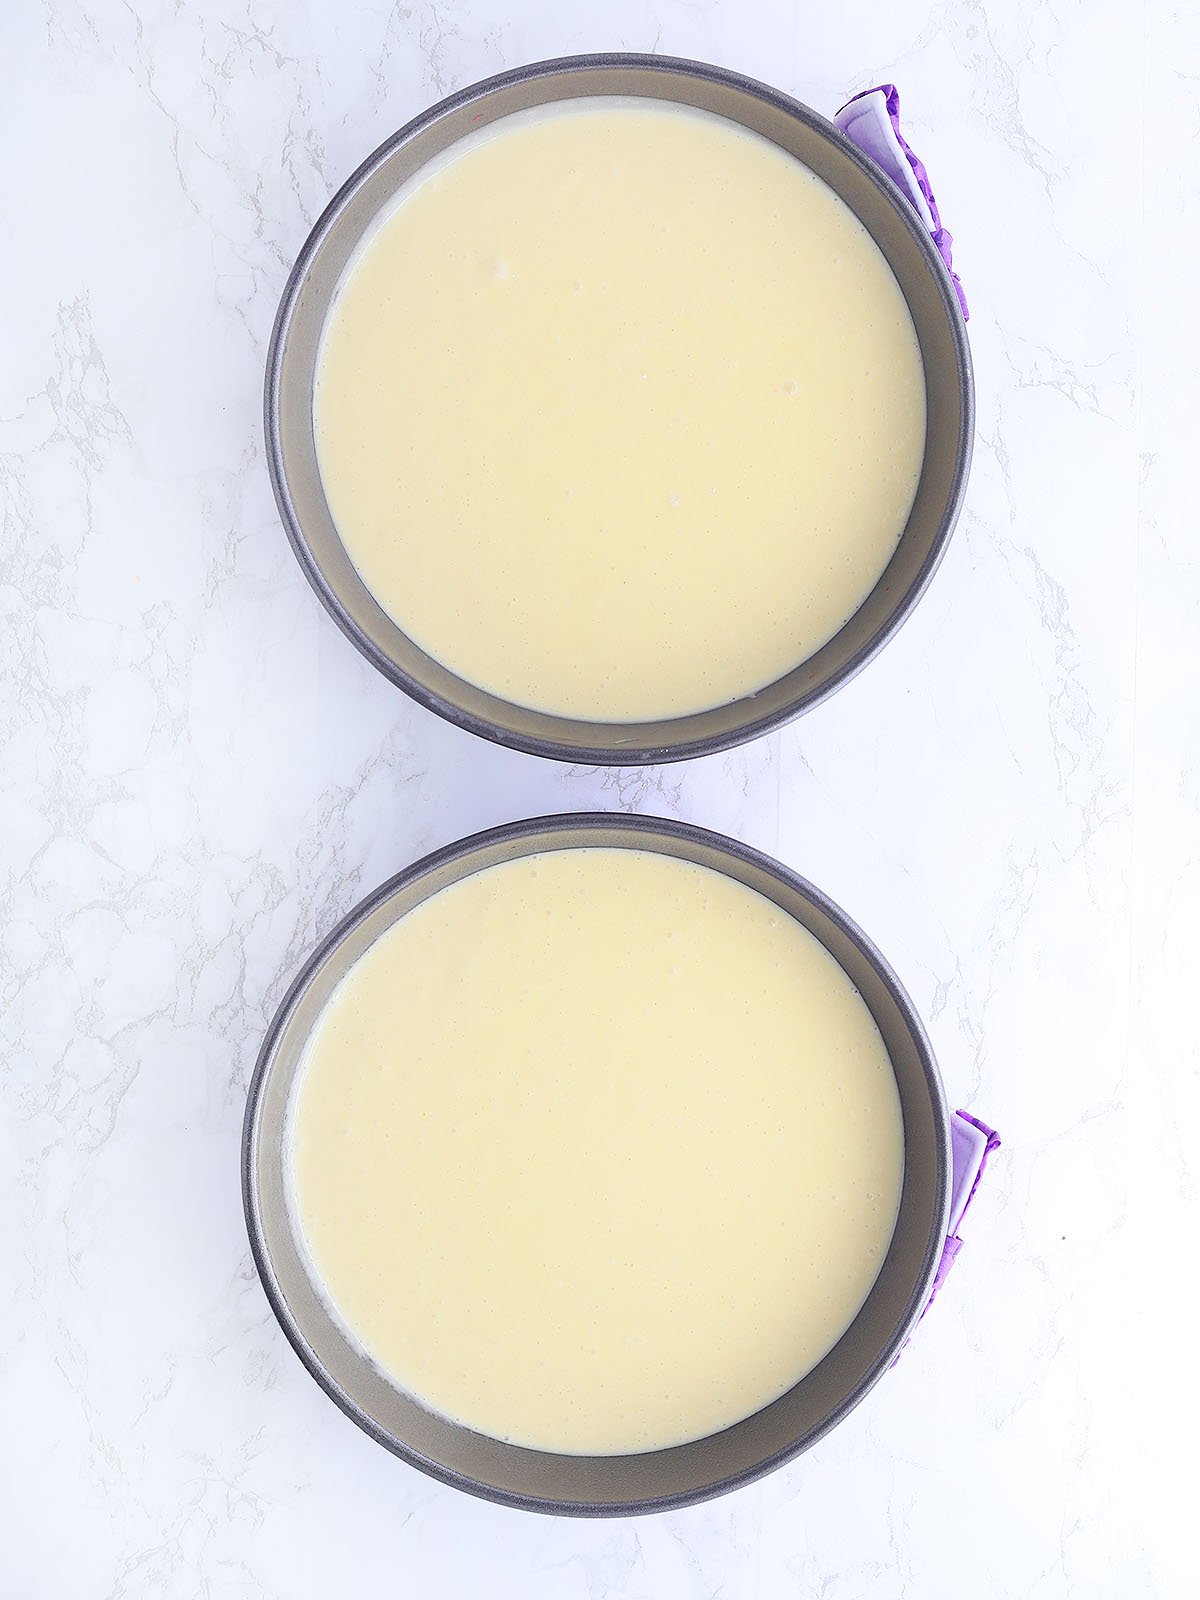 unbaked cake batter in two round cake pans.